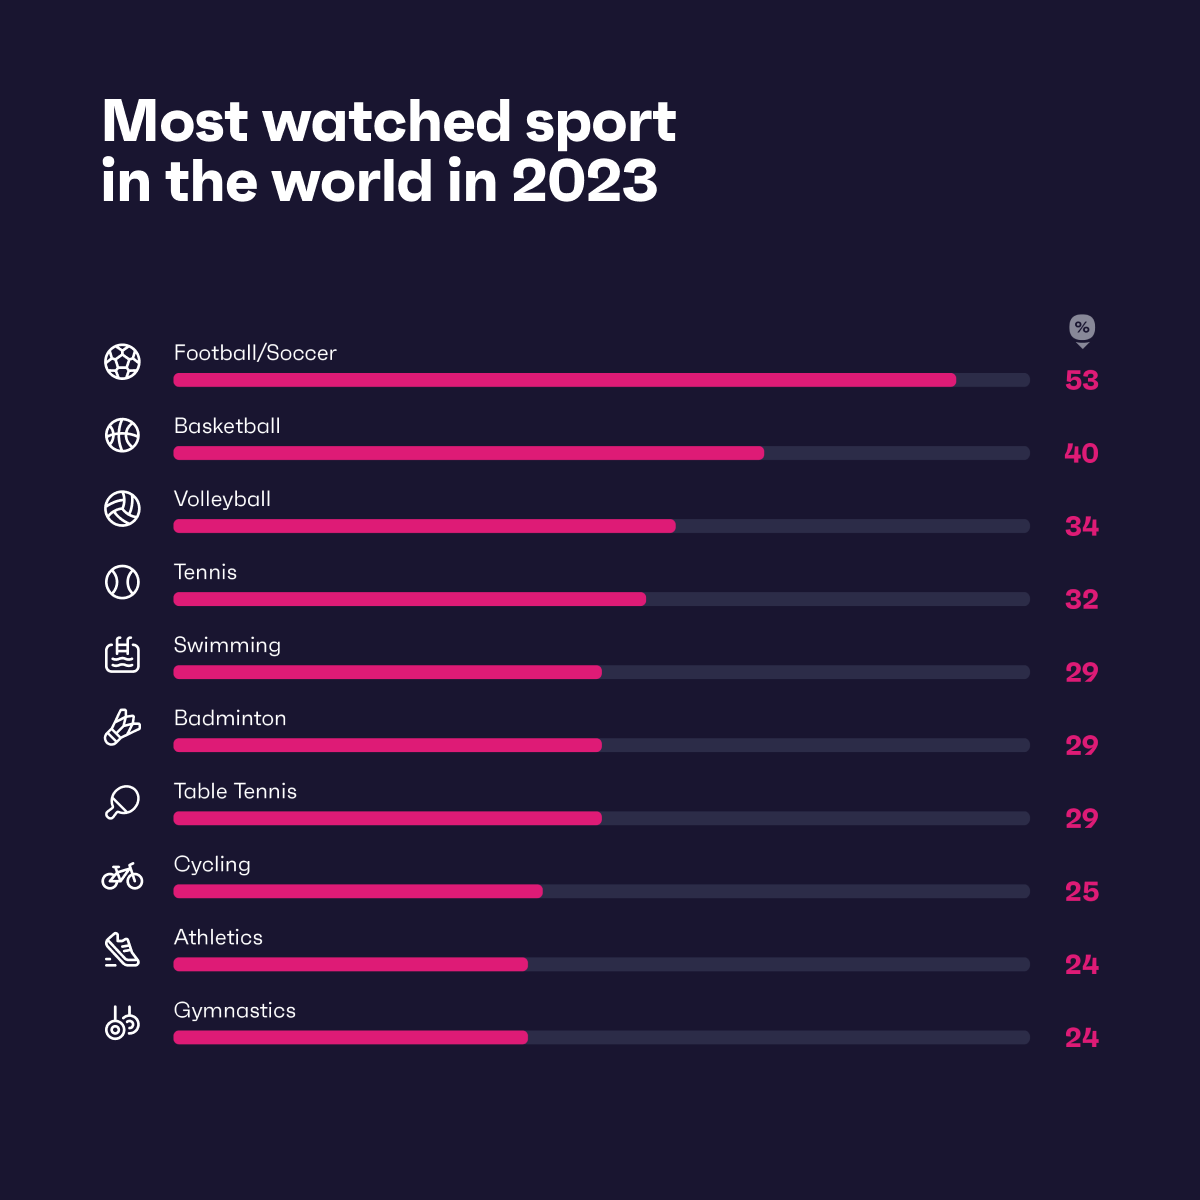 Chart showing the most watched sports in the world for 2023 in percentages